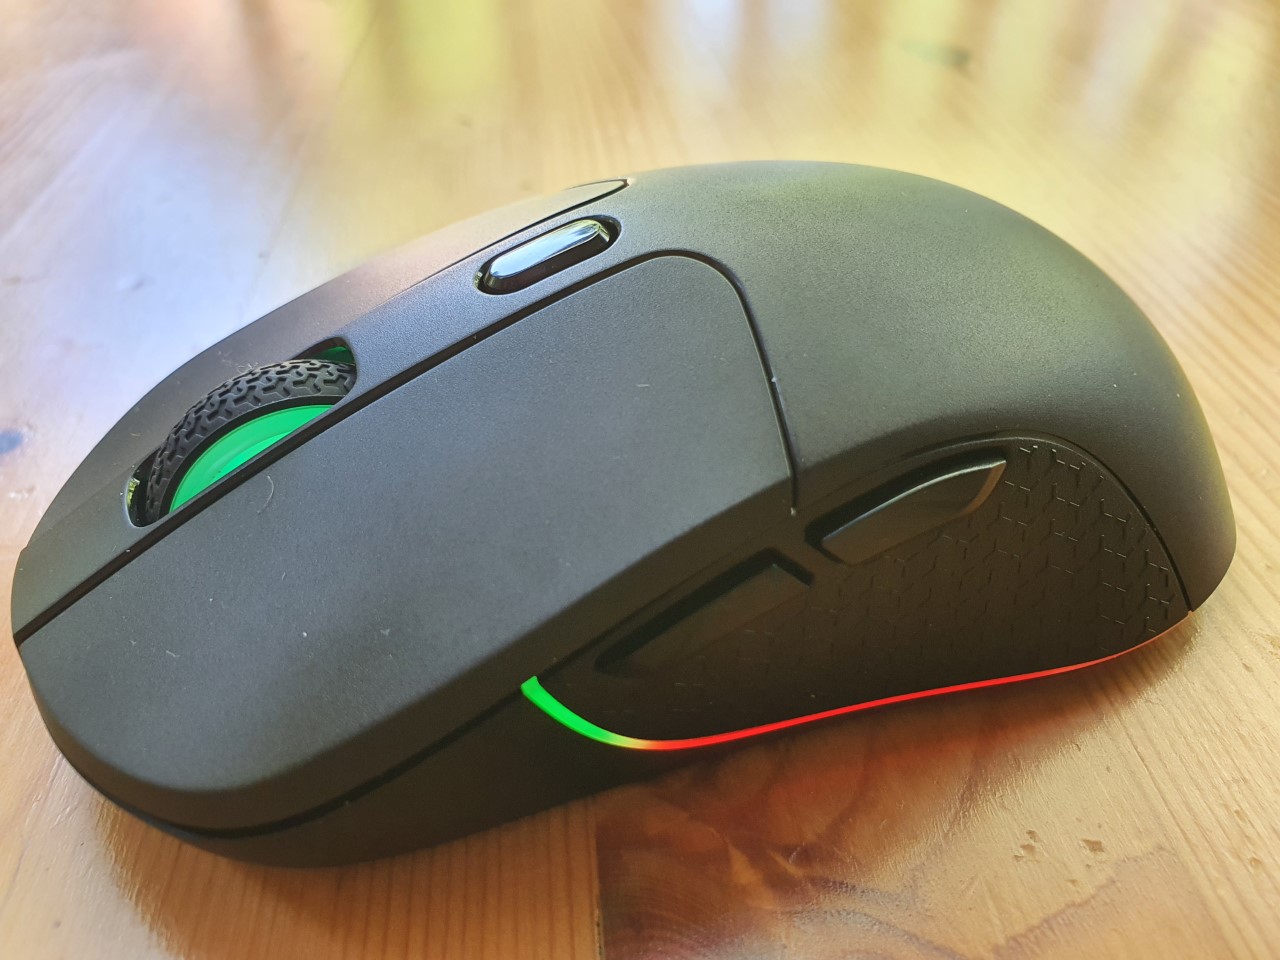 Keychron M3 - Best wireless gaming mouse